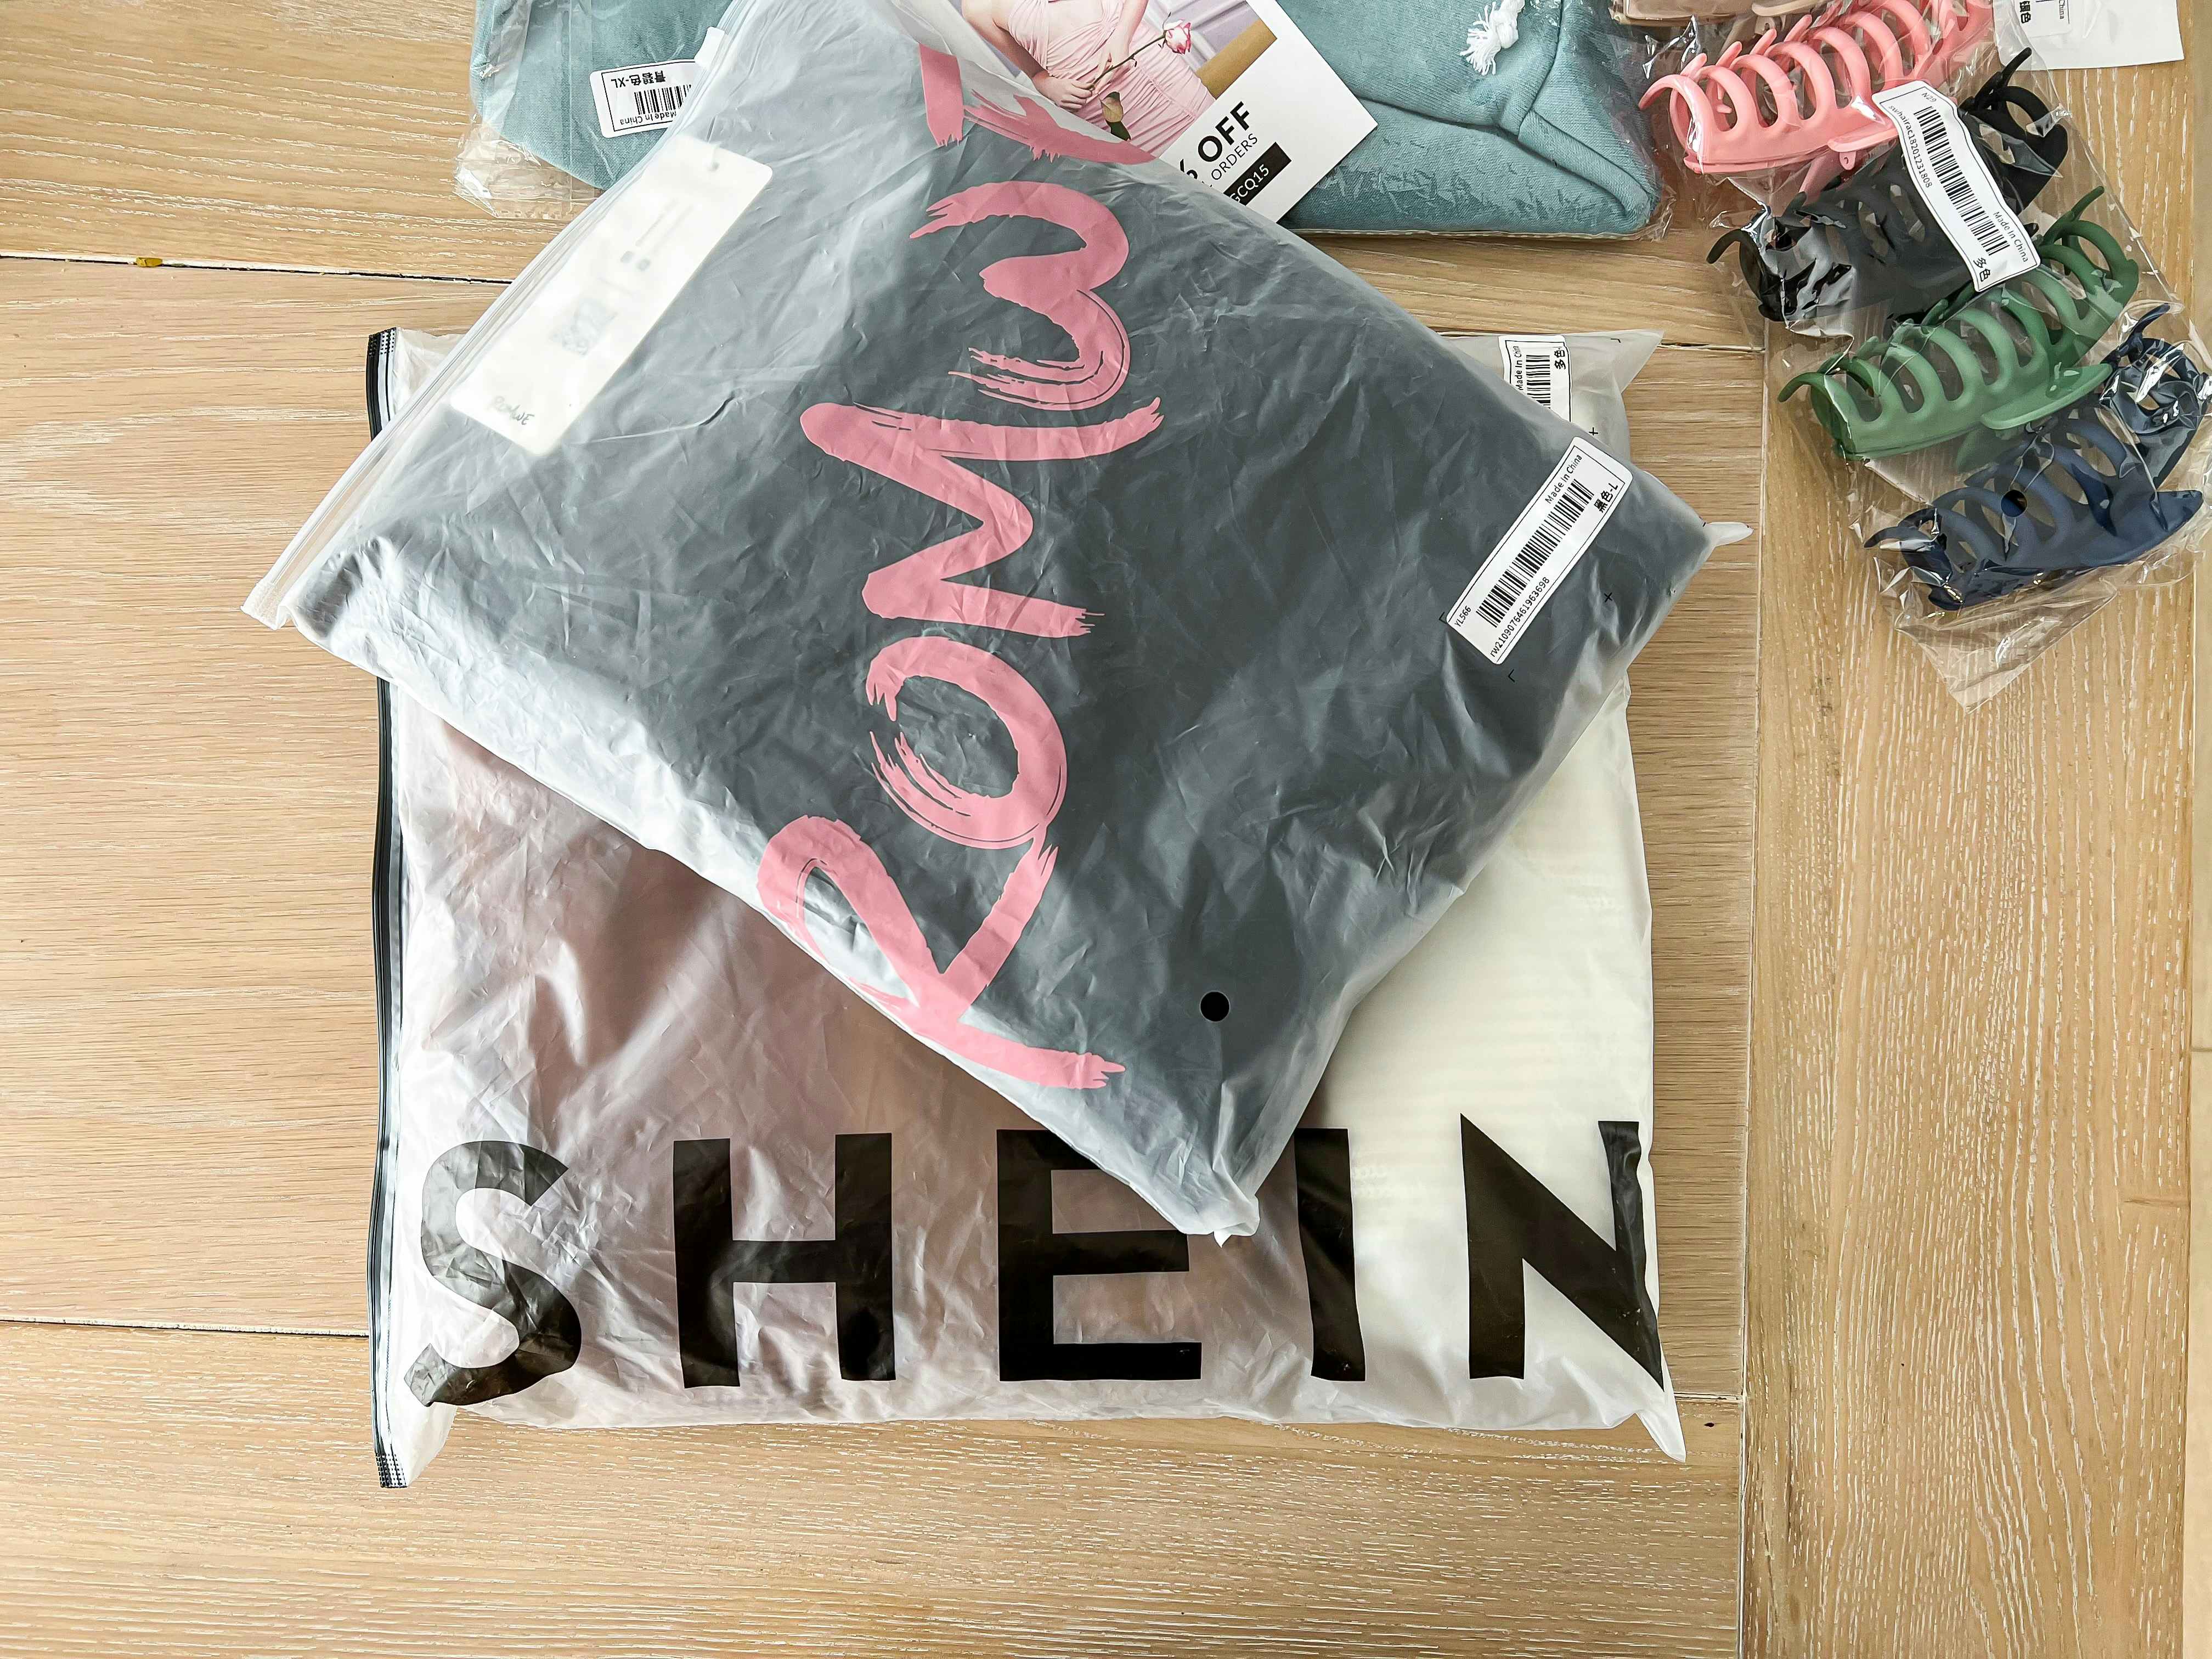 NEW IN SHEIN BAG HAUL 2021, YOU NEED THESE BAGS!